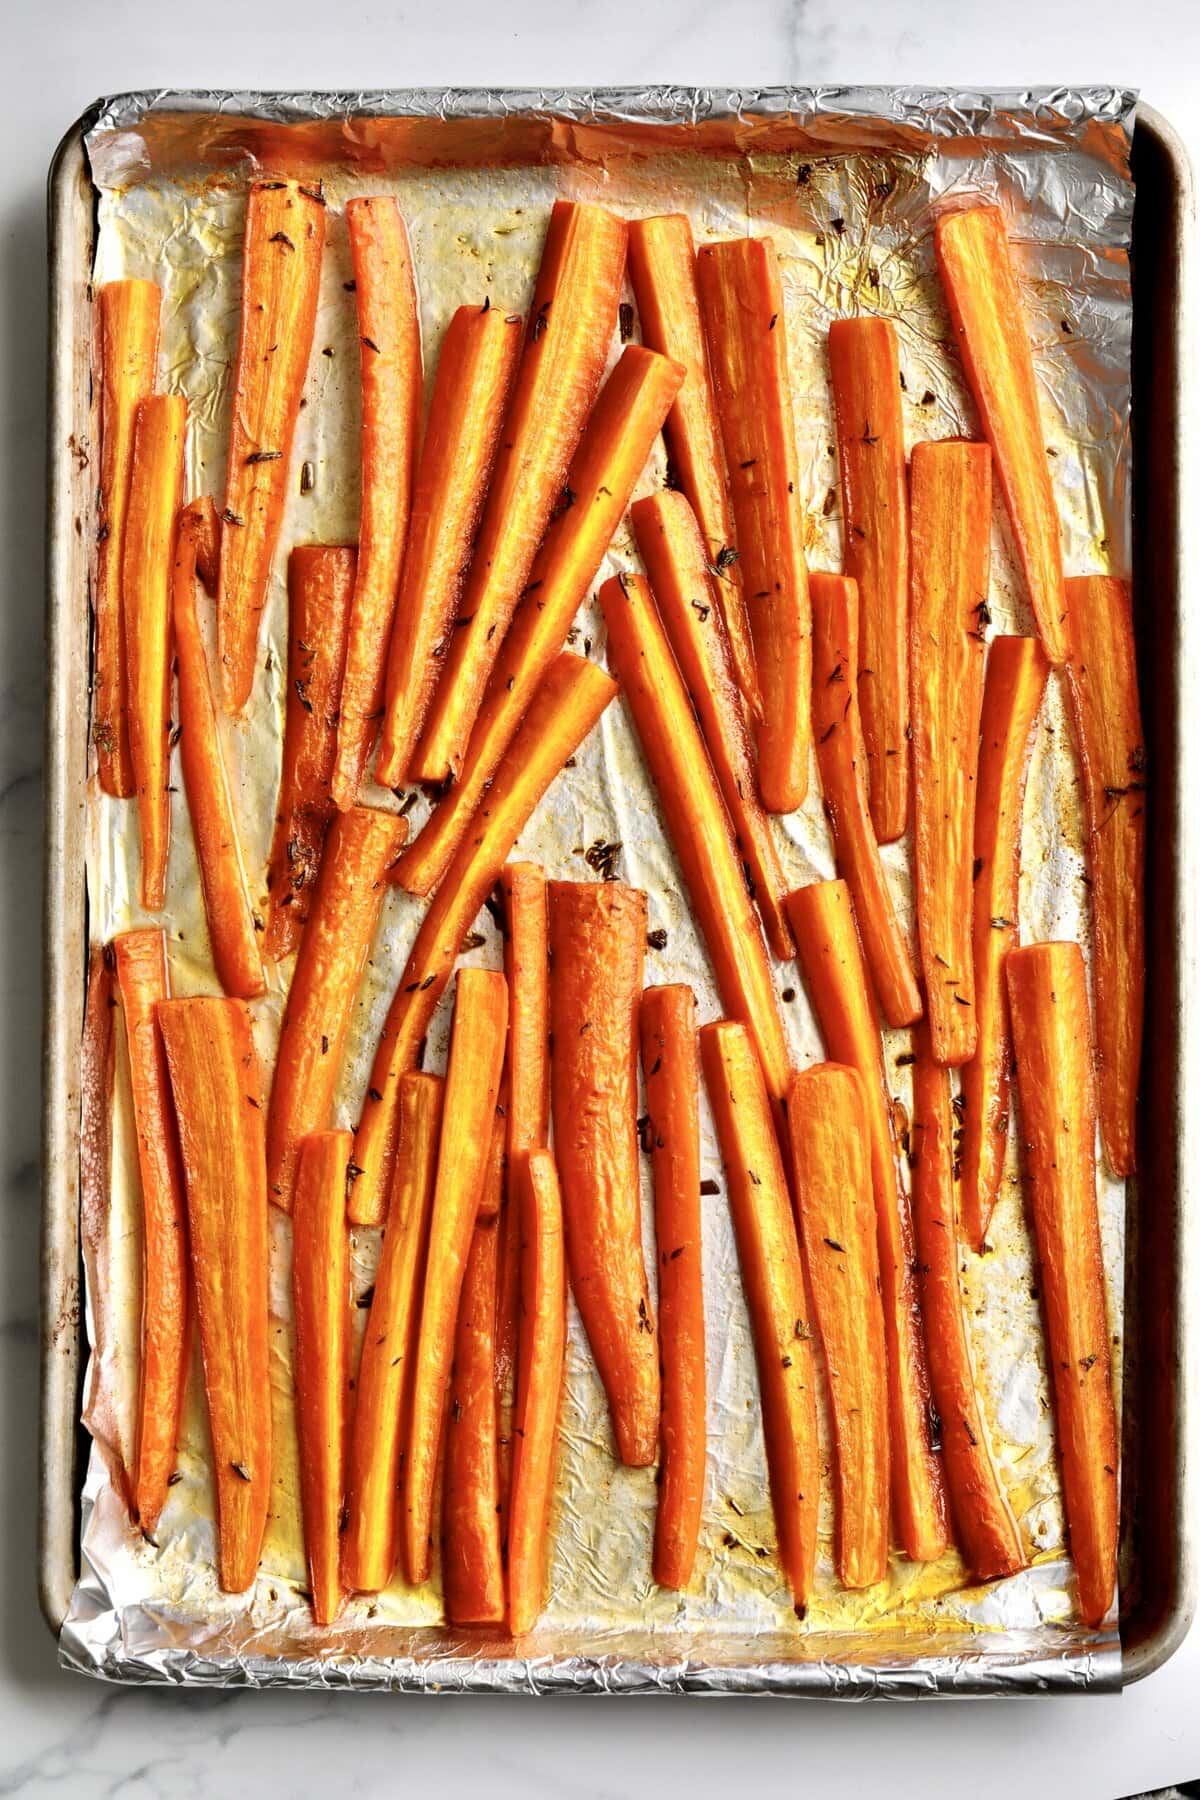 How to makeBest Honey Glazed Carrots Recipe (Oven Roasted)- finished carrots on a baking sheet lined with foil.